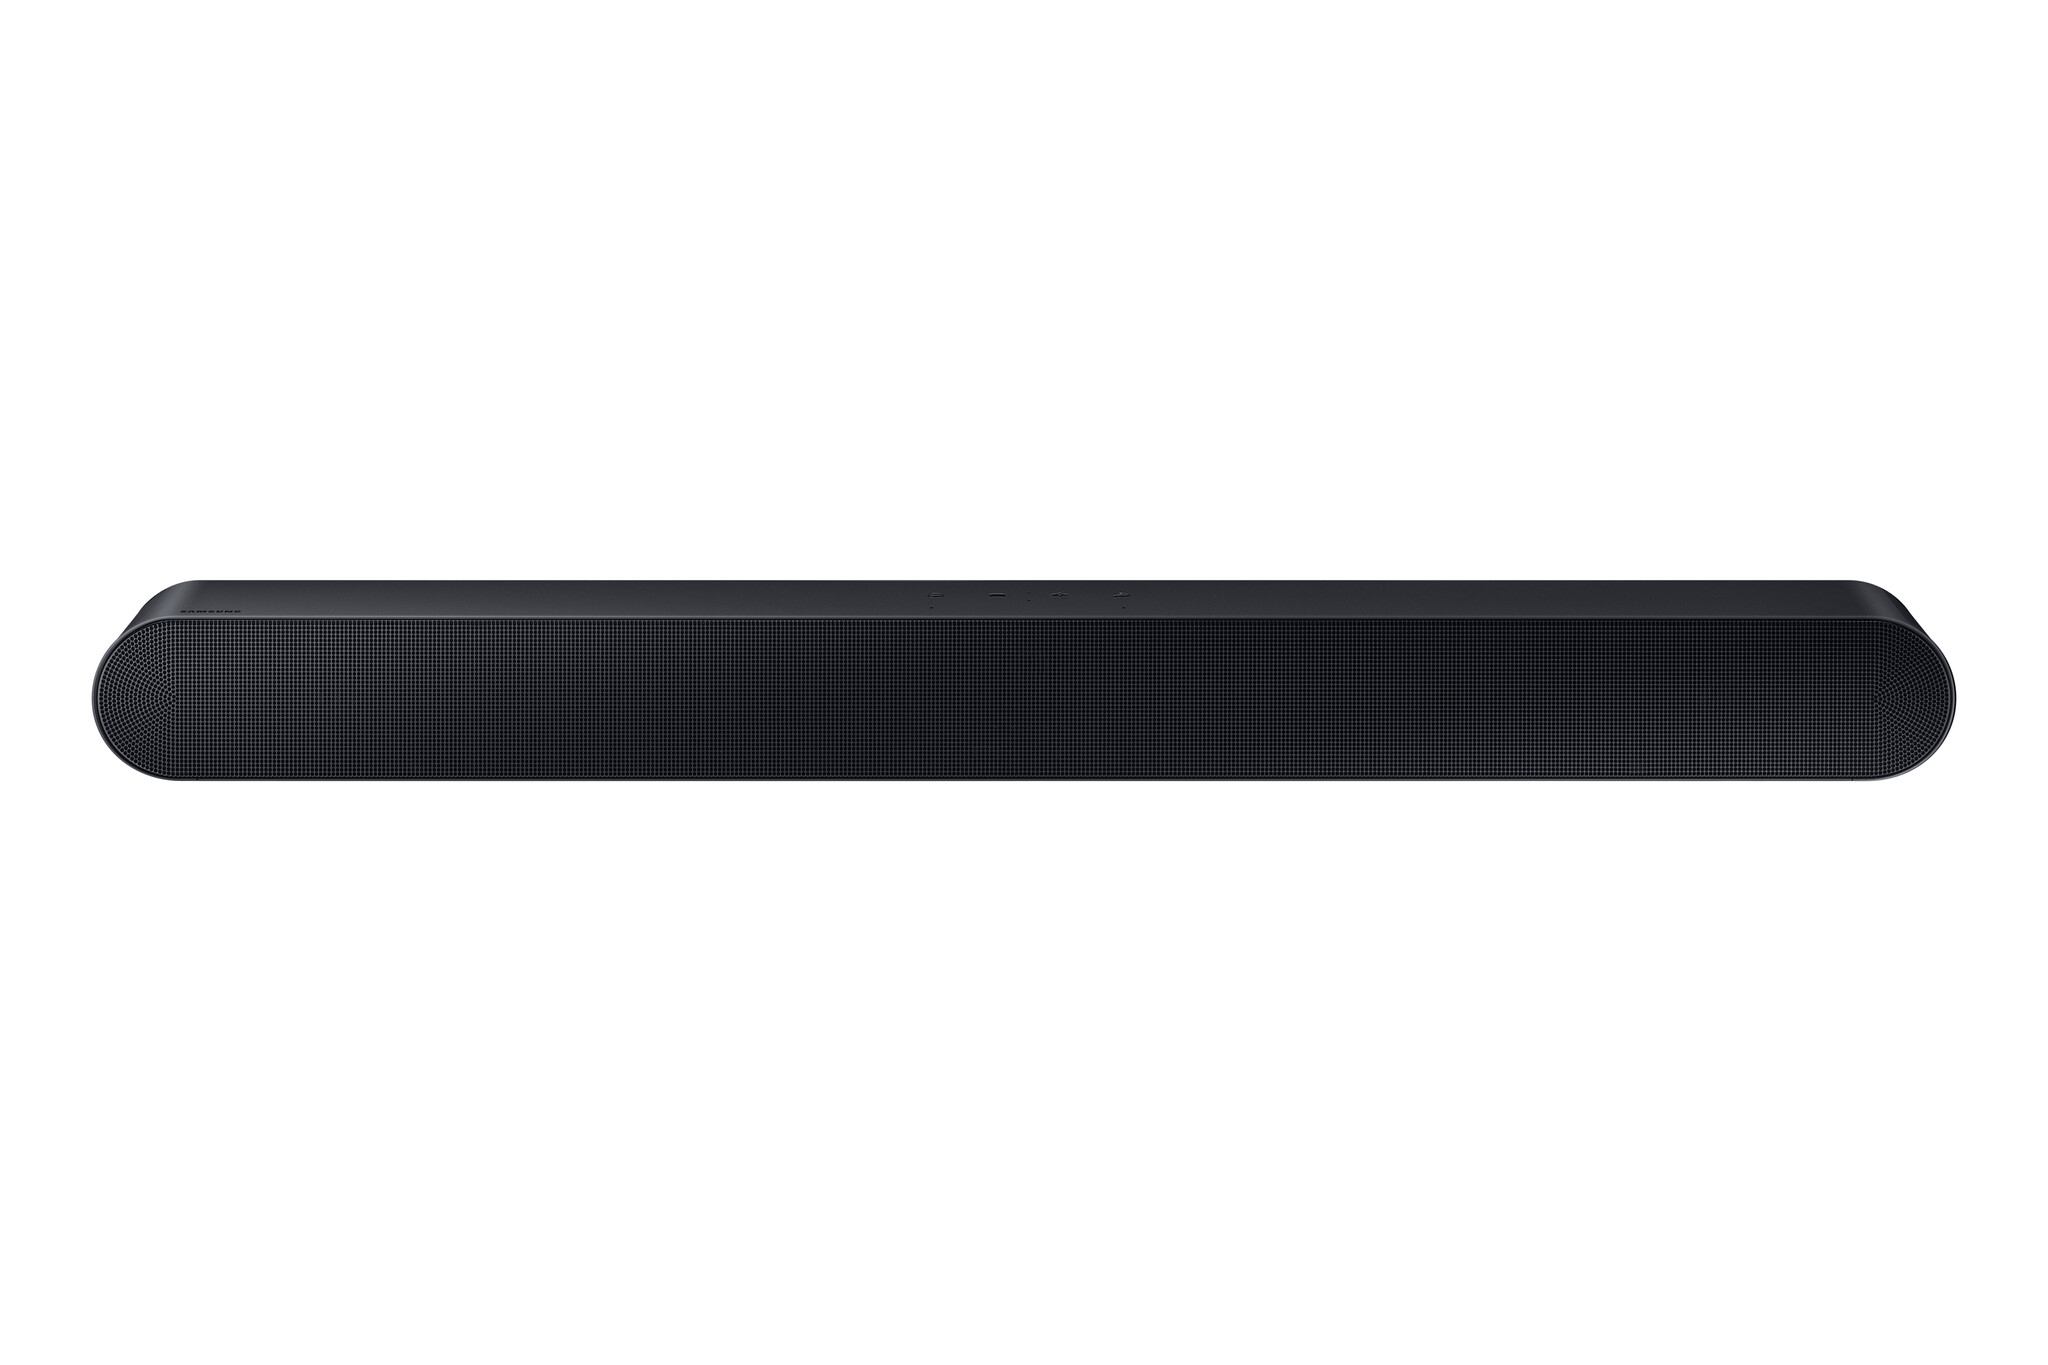 Samsung HW-S60B Bluetooth 5.0 Soundbar with Q-Symphony, Dolby Atmos® and DTS, and 7 Built-In Speakers #365903